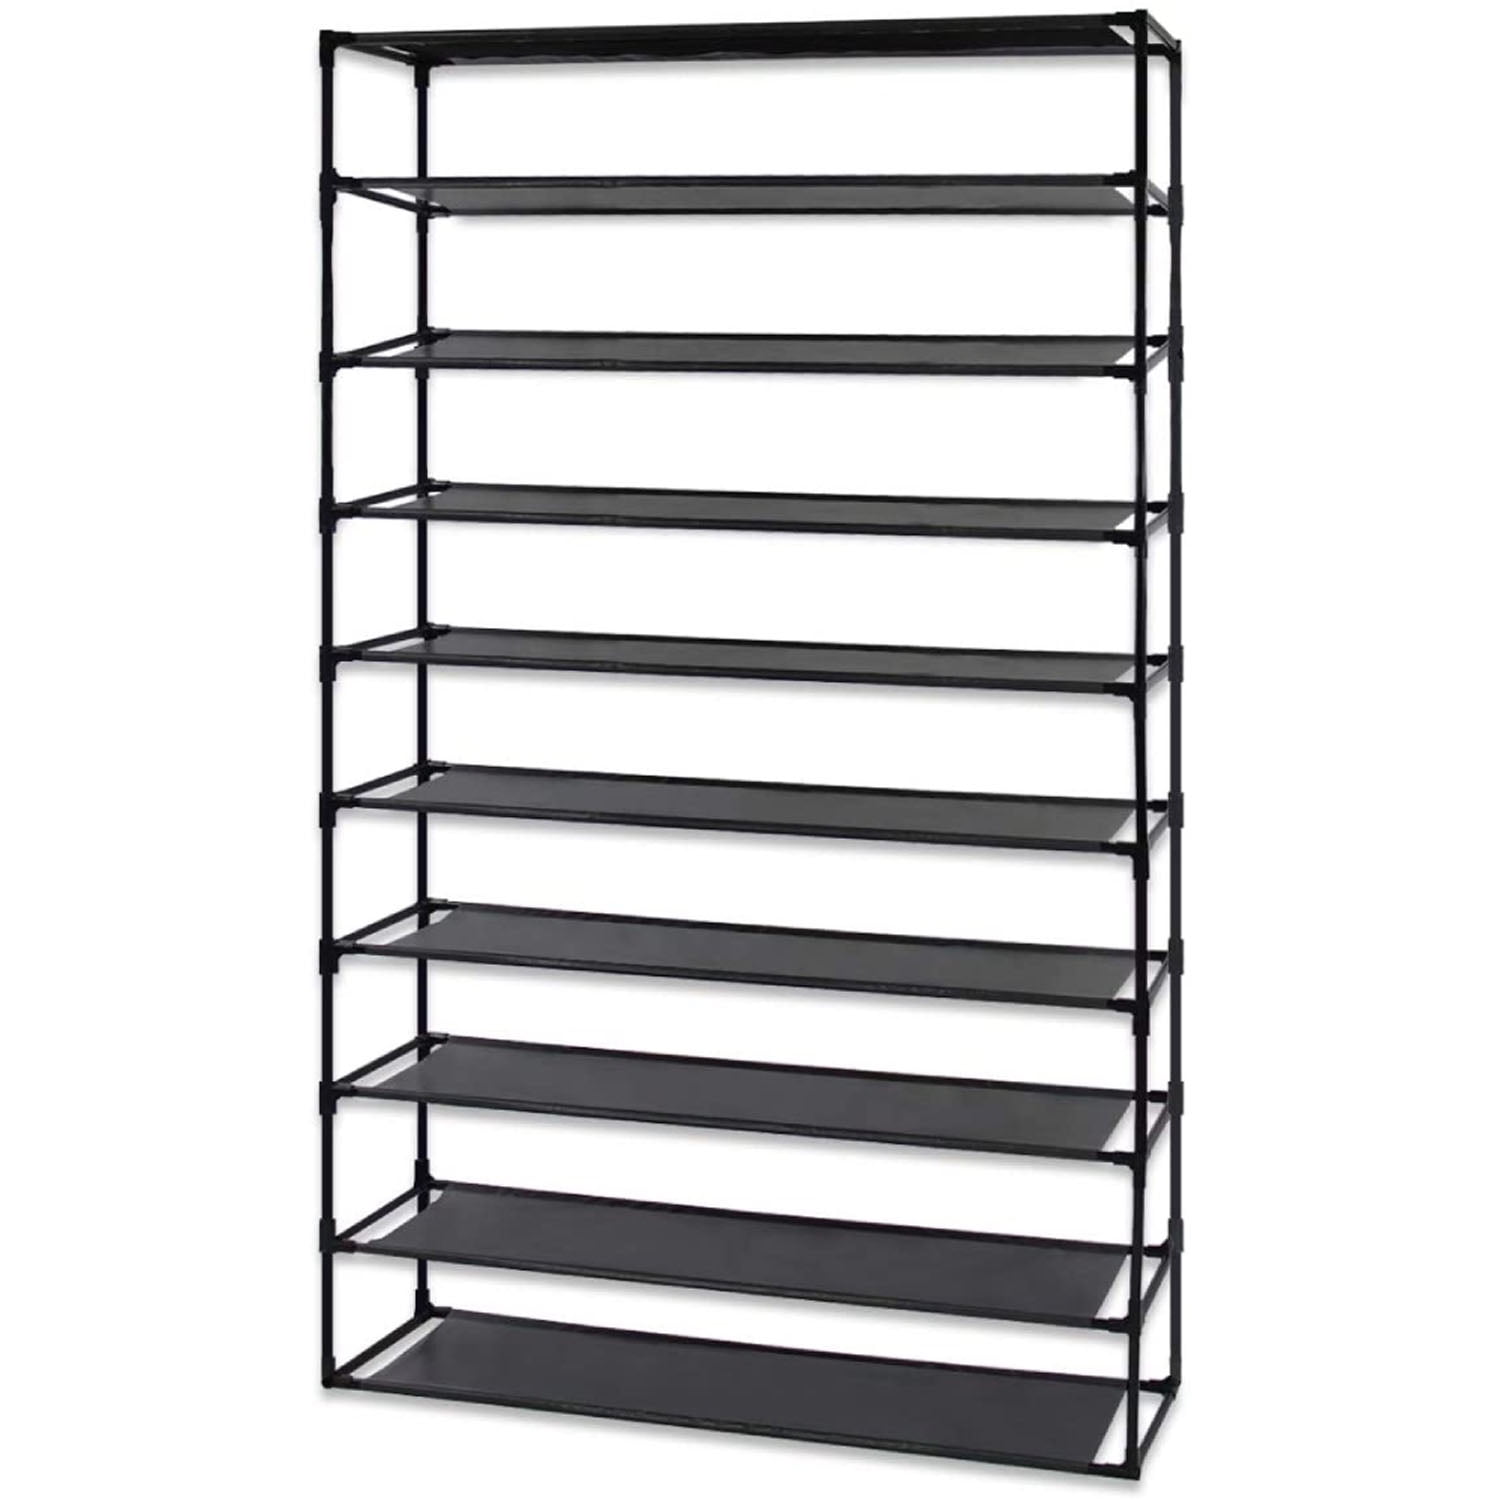 UWR-Nite 10 Tiers Shoe Rack Organizer 50 Pairs,Adjustable Shoes Shelf Tower  Metal Tall for Closet,DIY Assembly